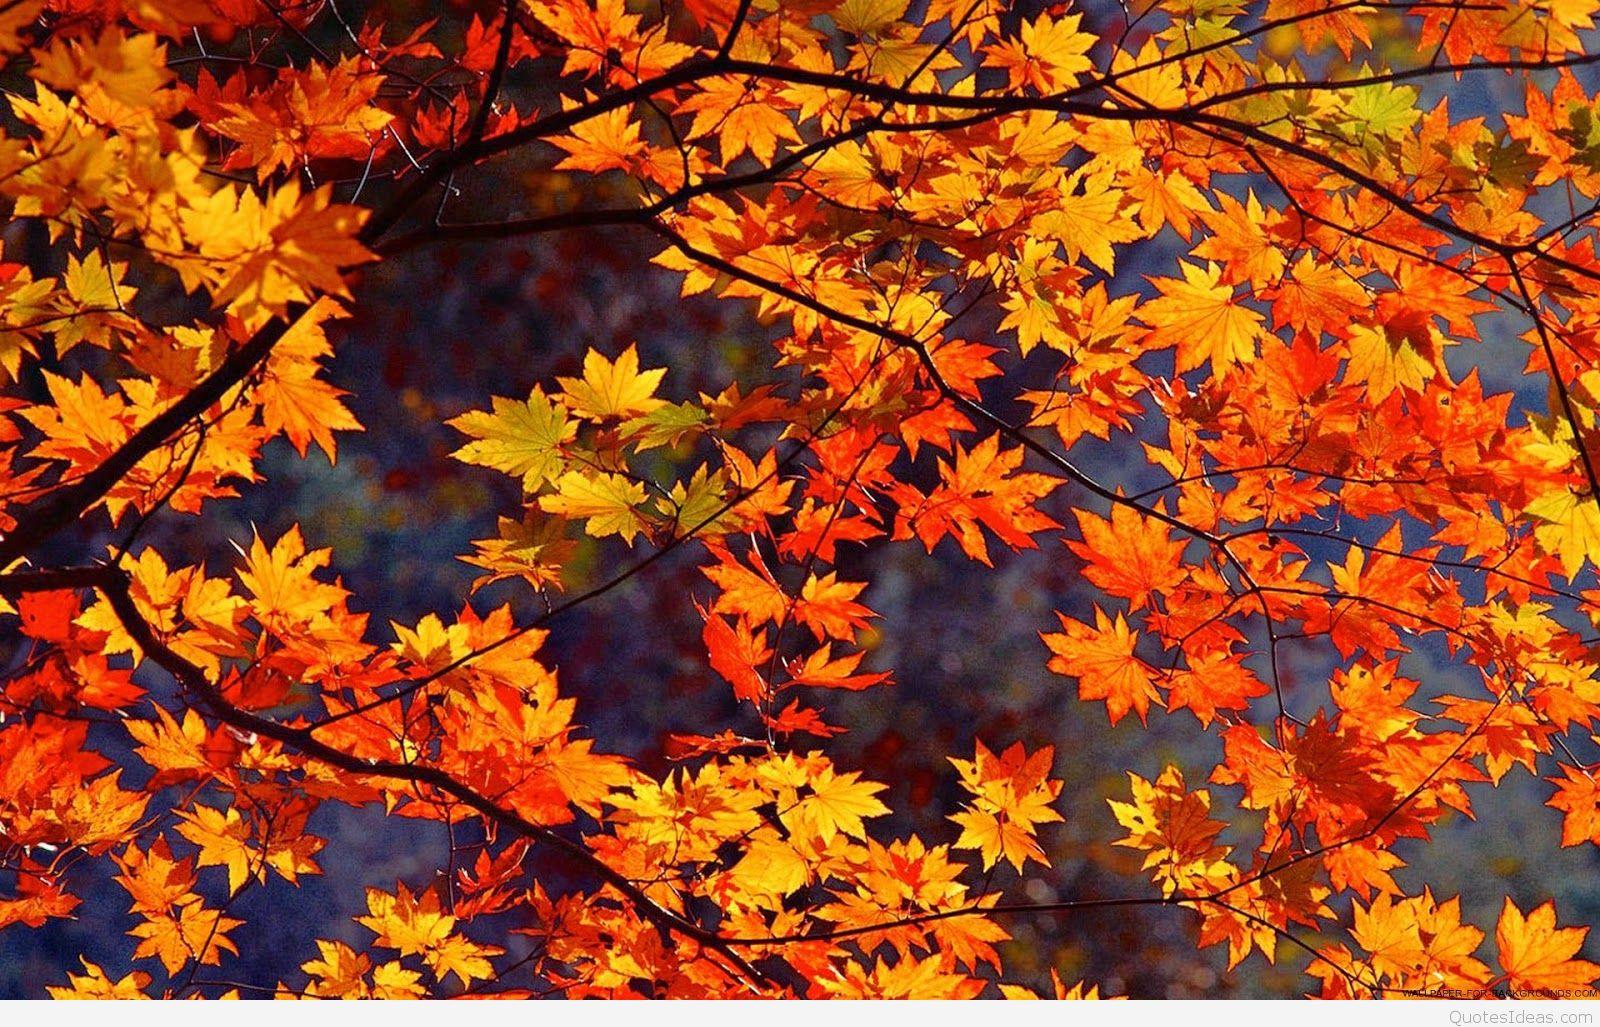 Today is first day of Autumn quotes messages with wallpaper